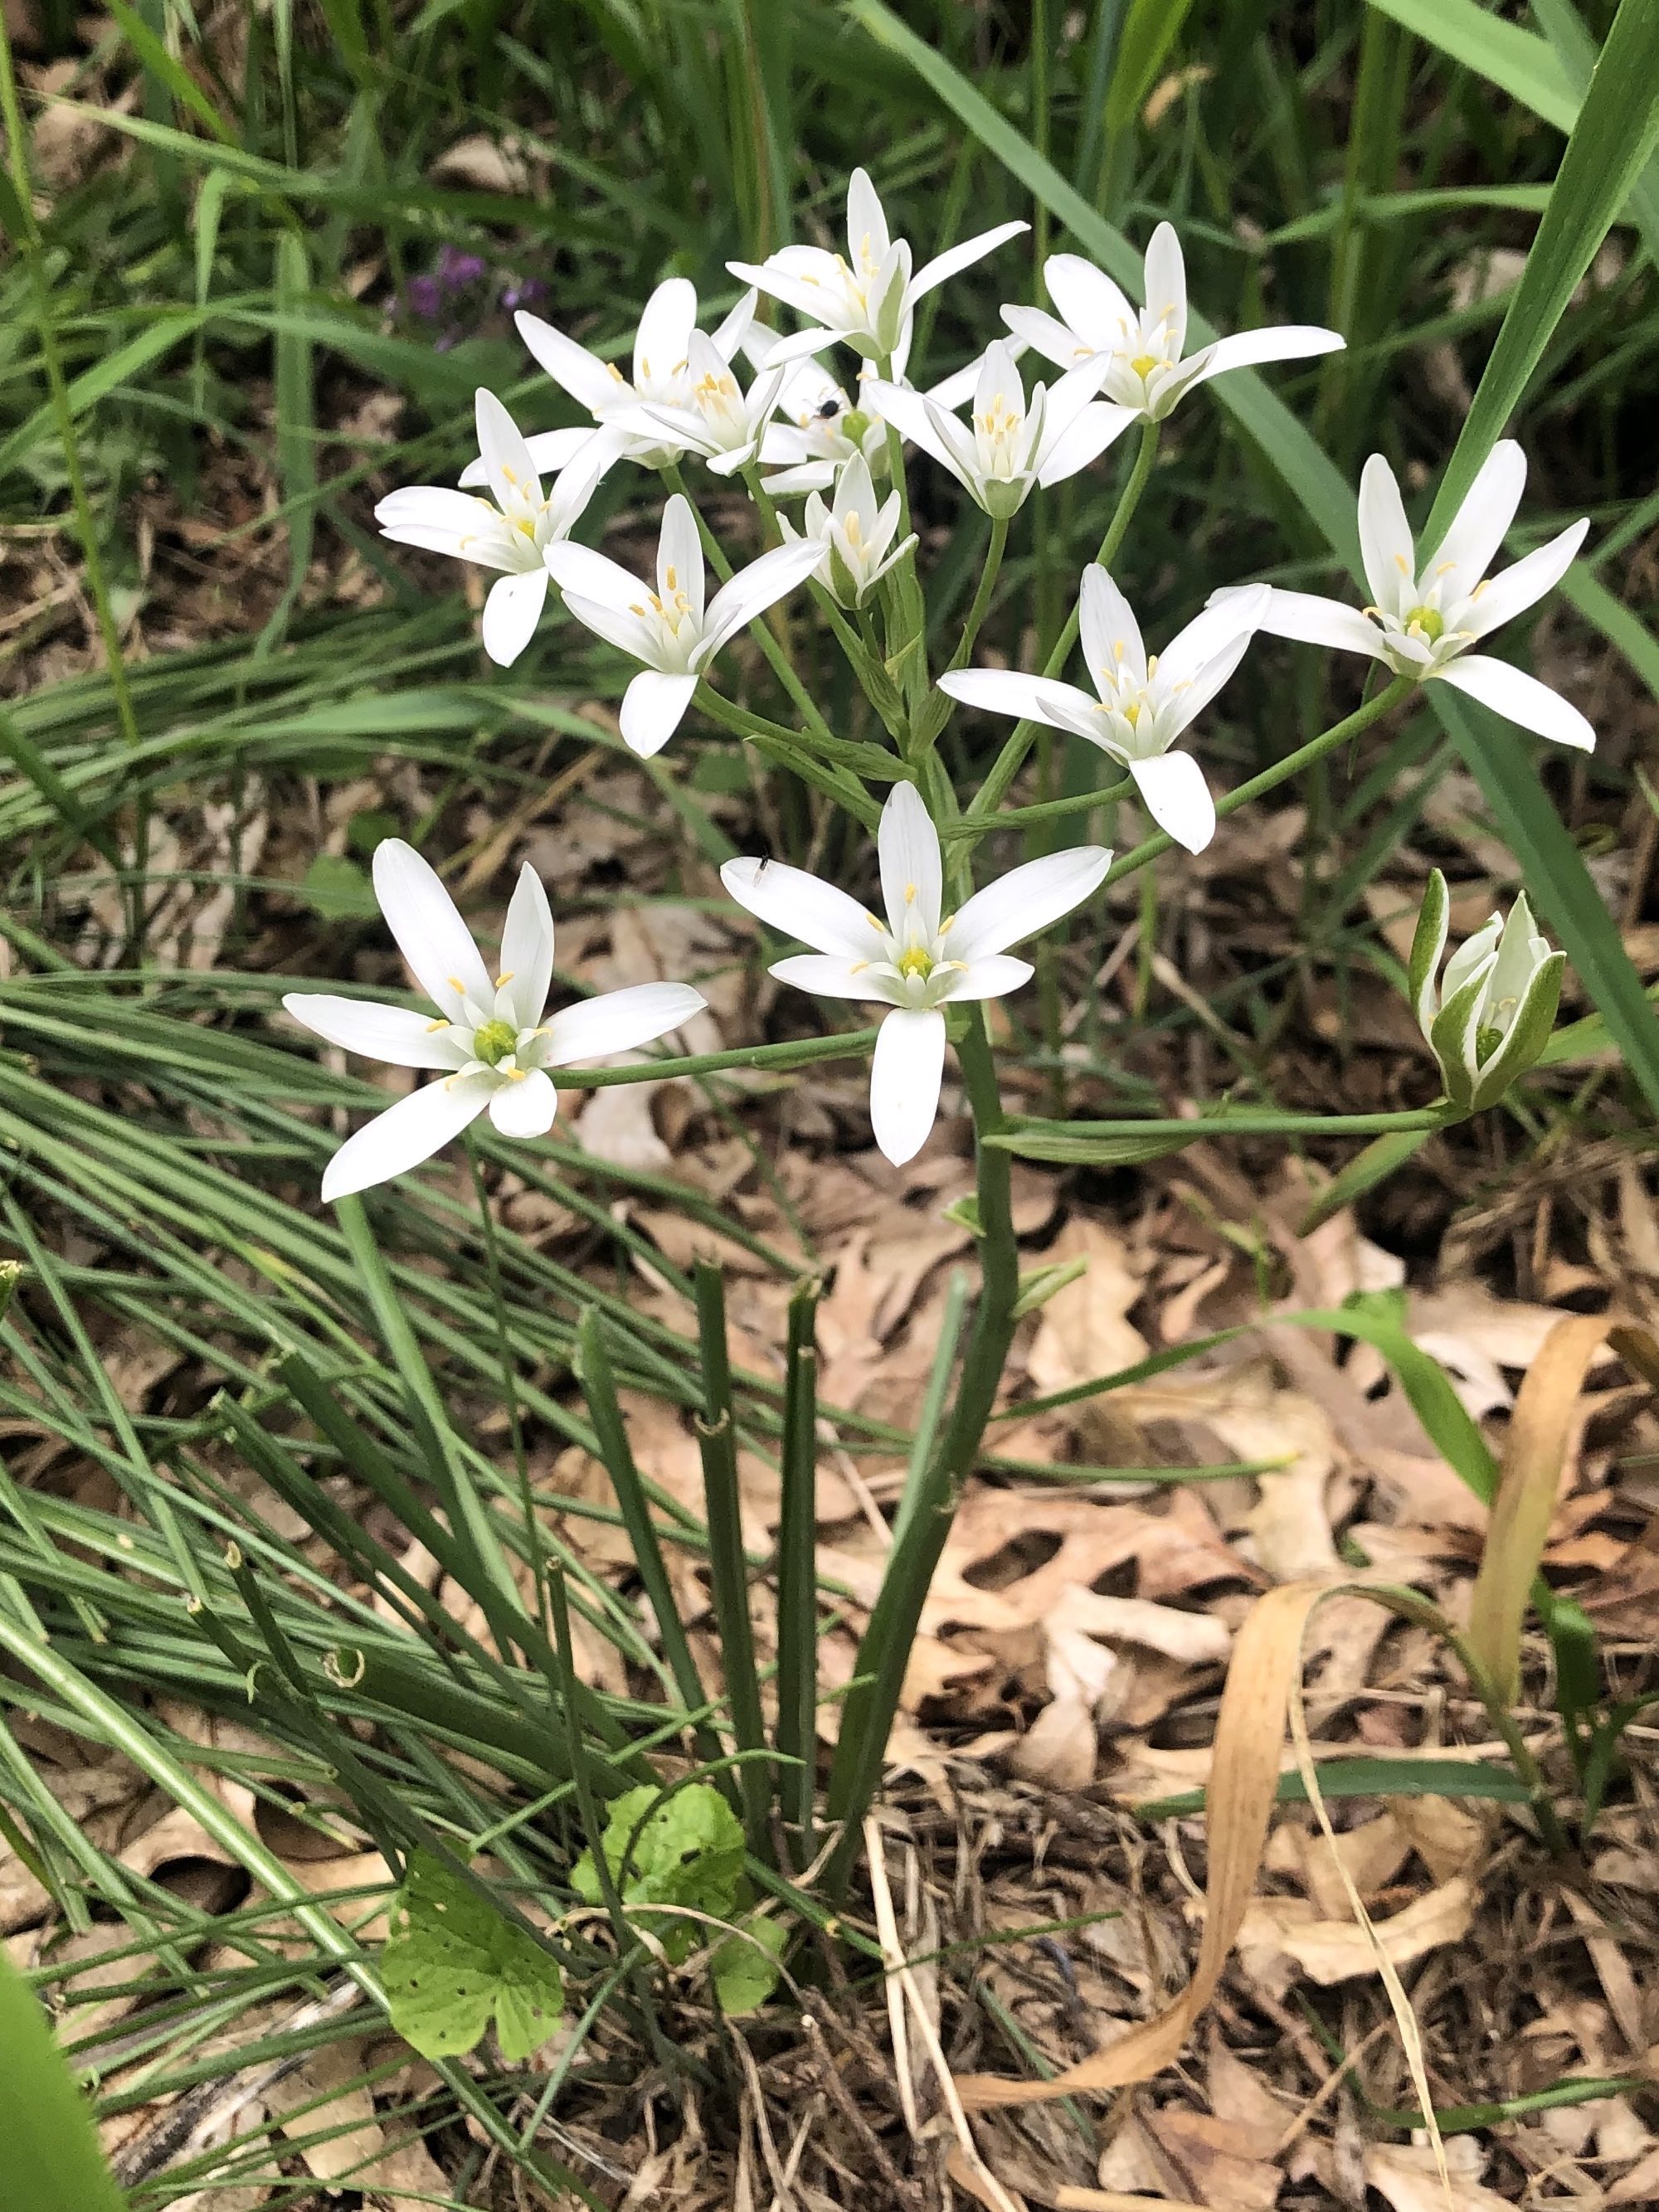 Star-of-Bethlehem along bike path behind Gregory Street in Madison, Wisconsin on May 28, 2022.